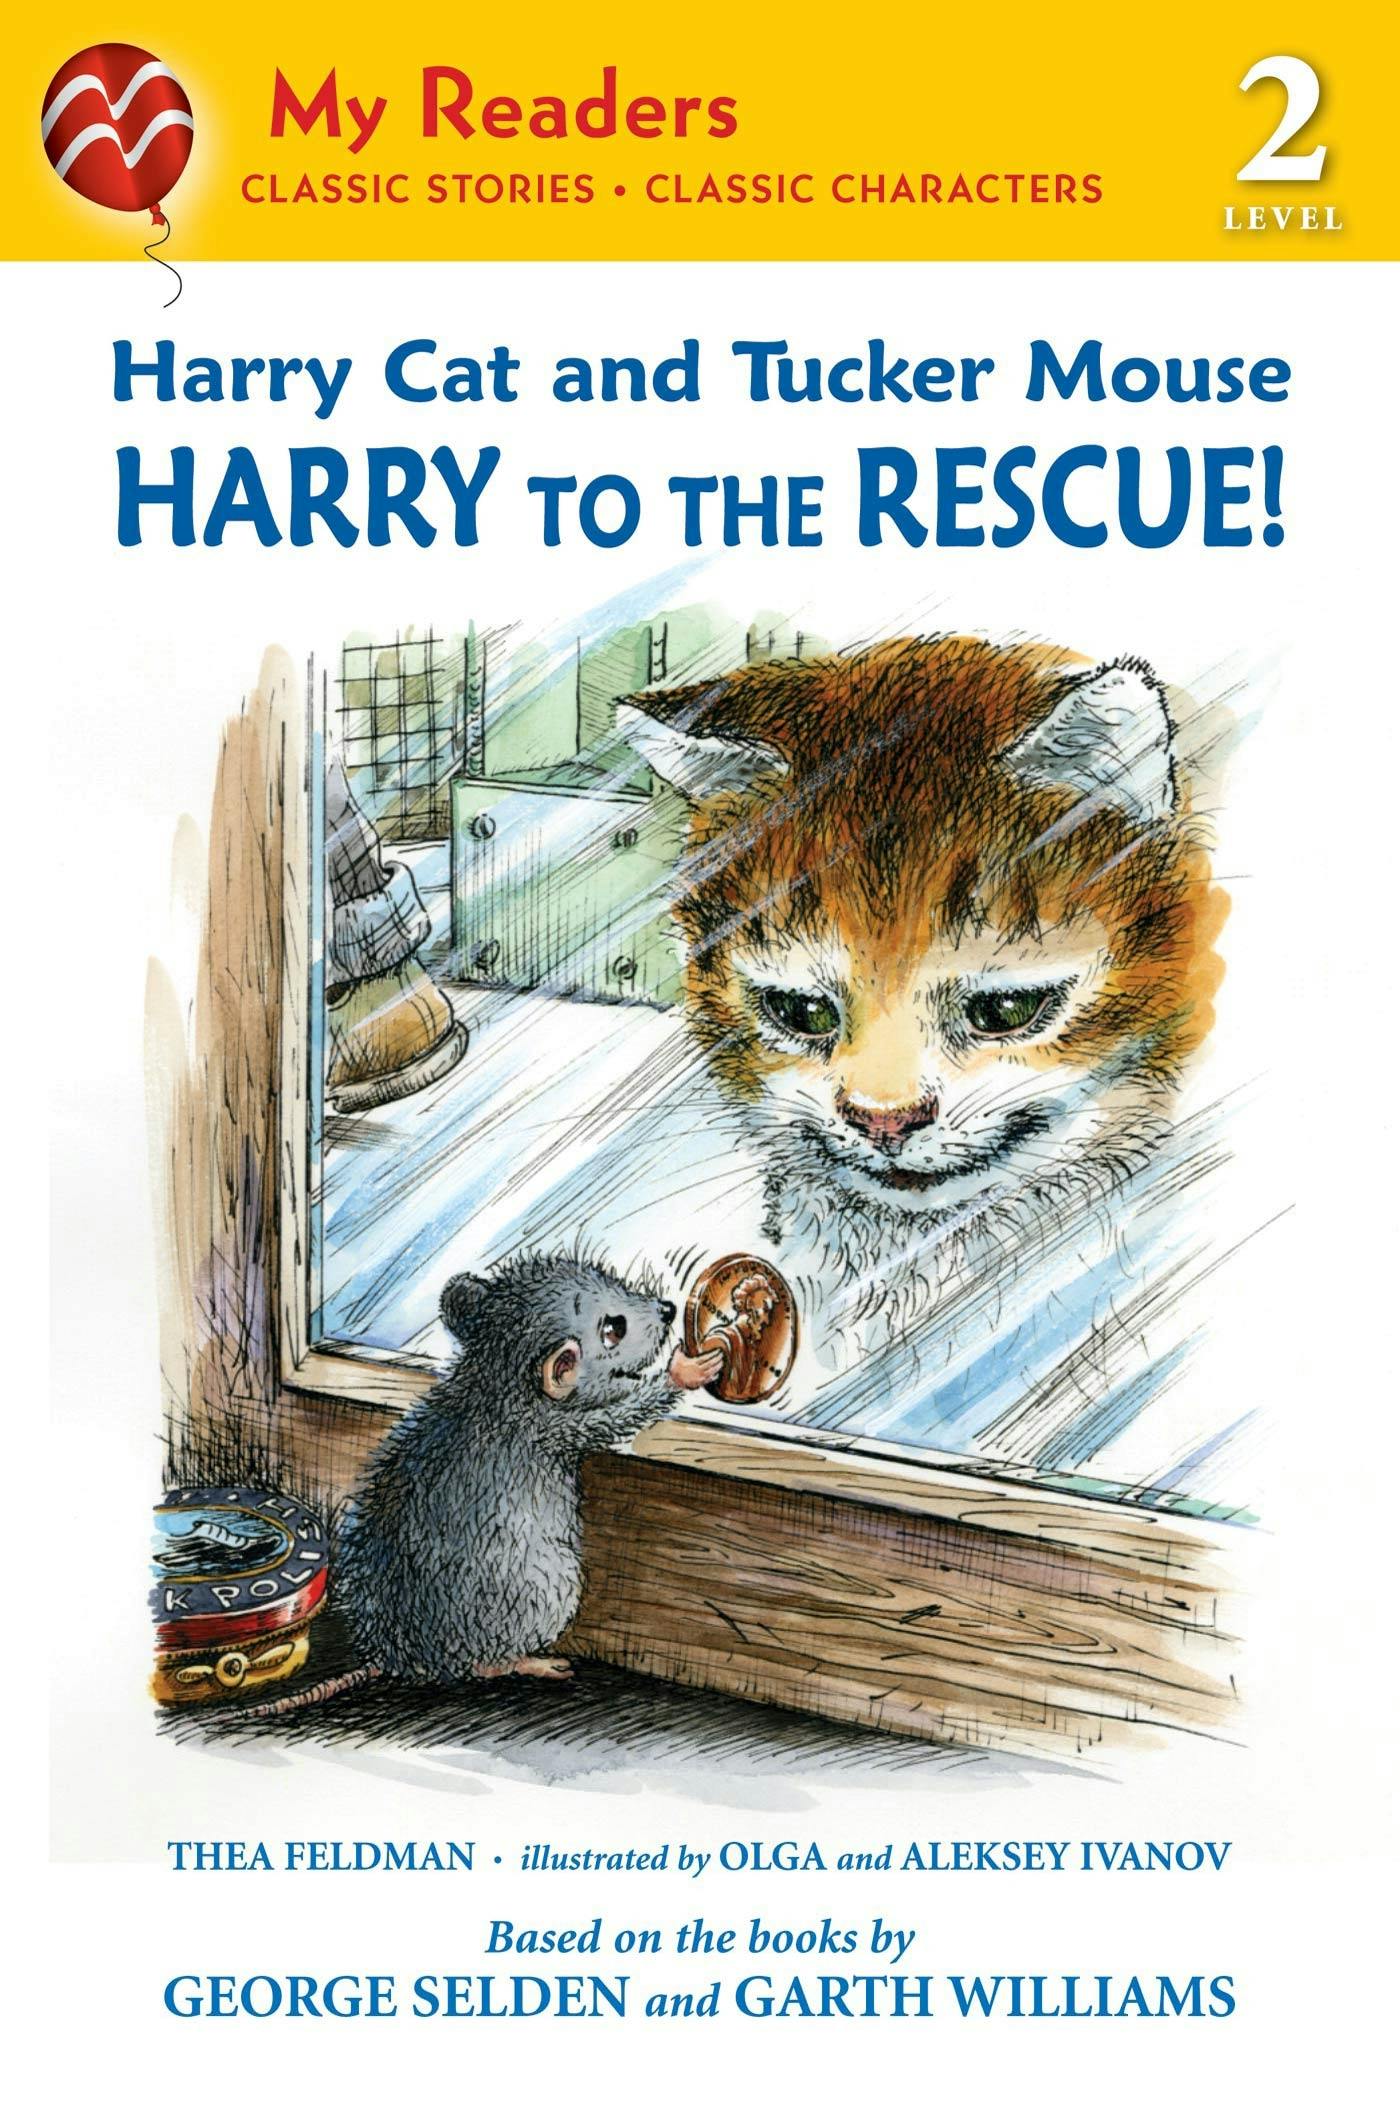 Harry Cat and Tucker Mouse: Harry to the Rescue!